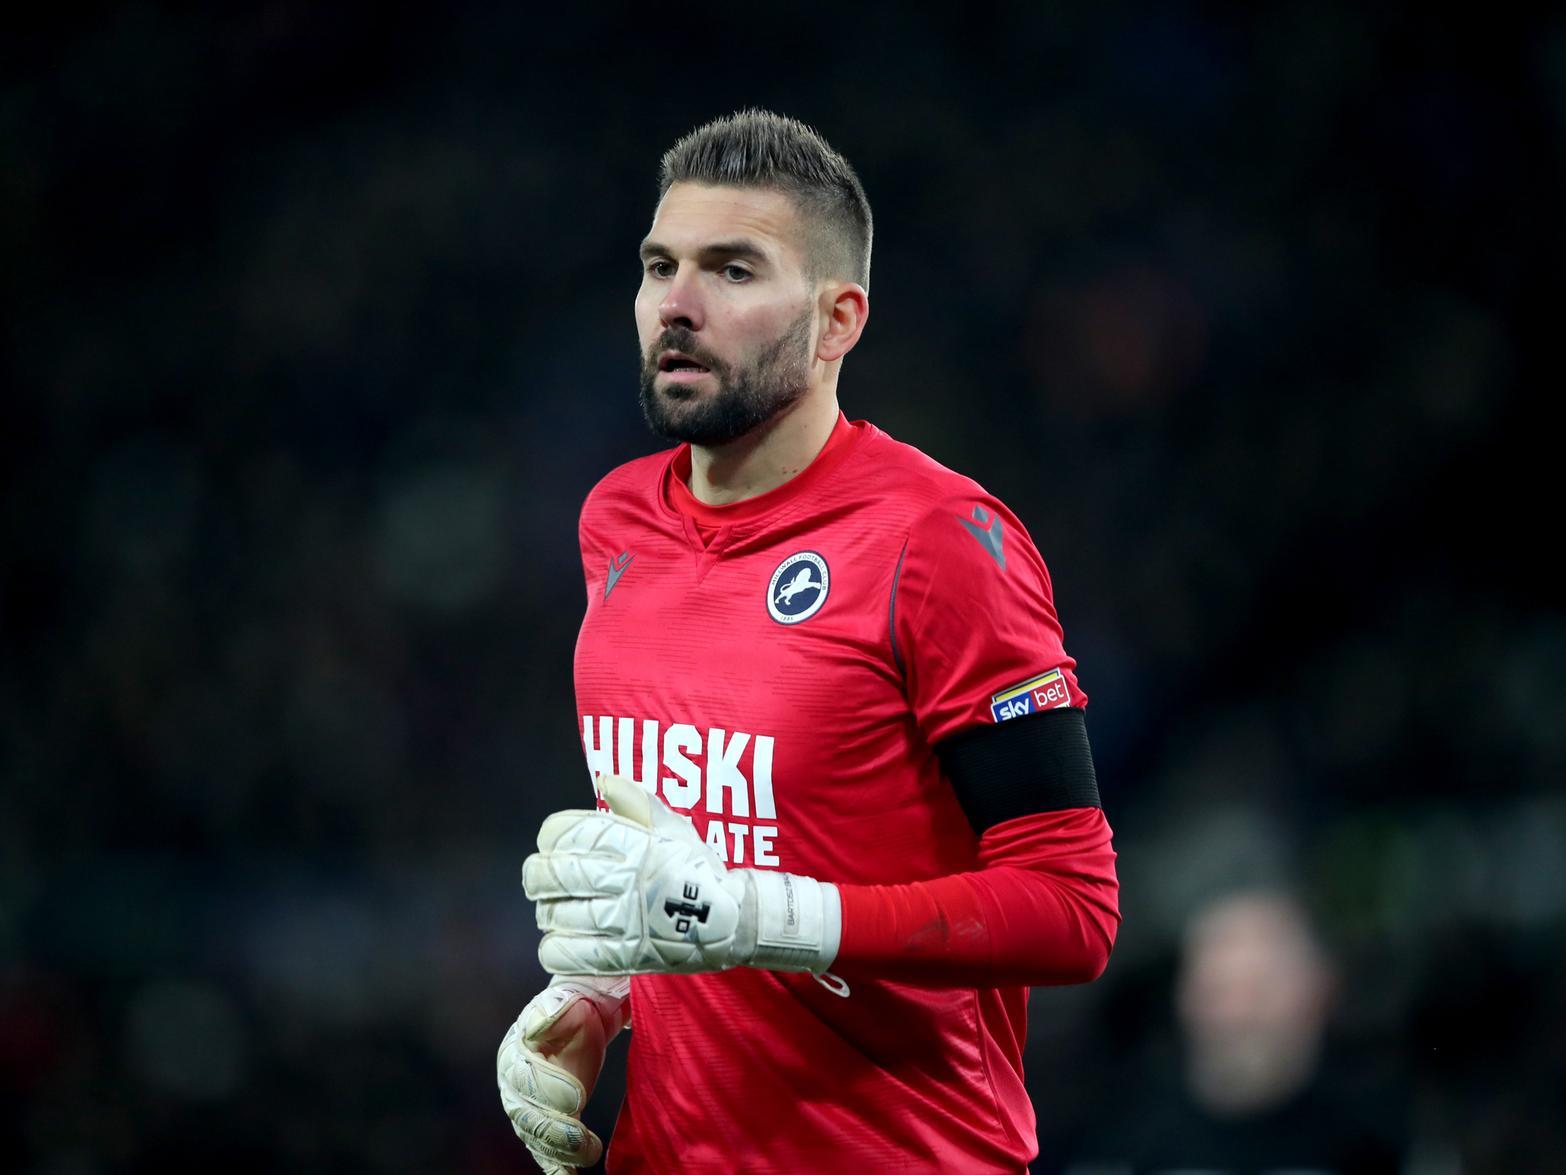 Millwall have snapped up goalkeeper Bartosz Bialkowski on a permanent deal from Ipswich Town, following an excellent loan spell with the in-form Championship side. (BBC Football)